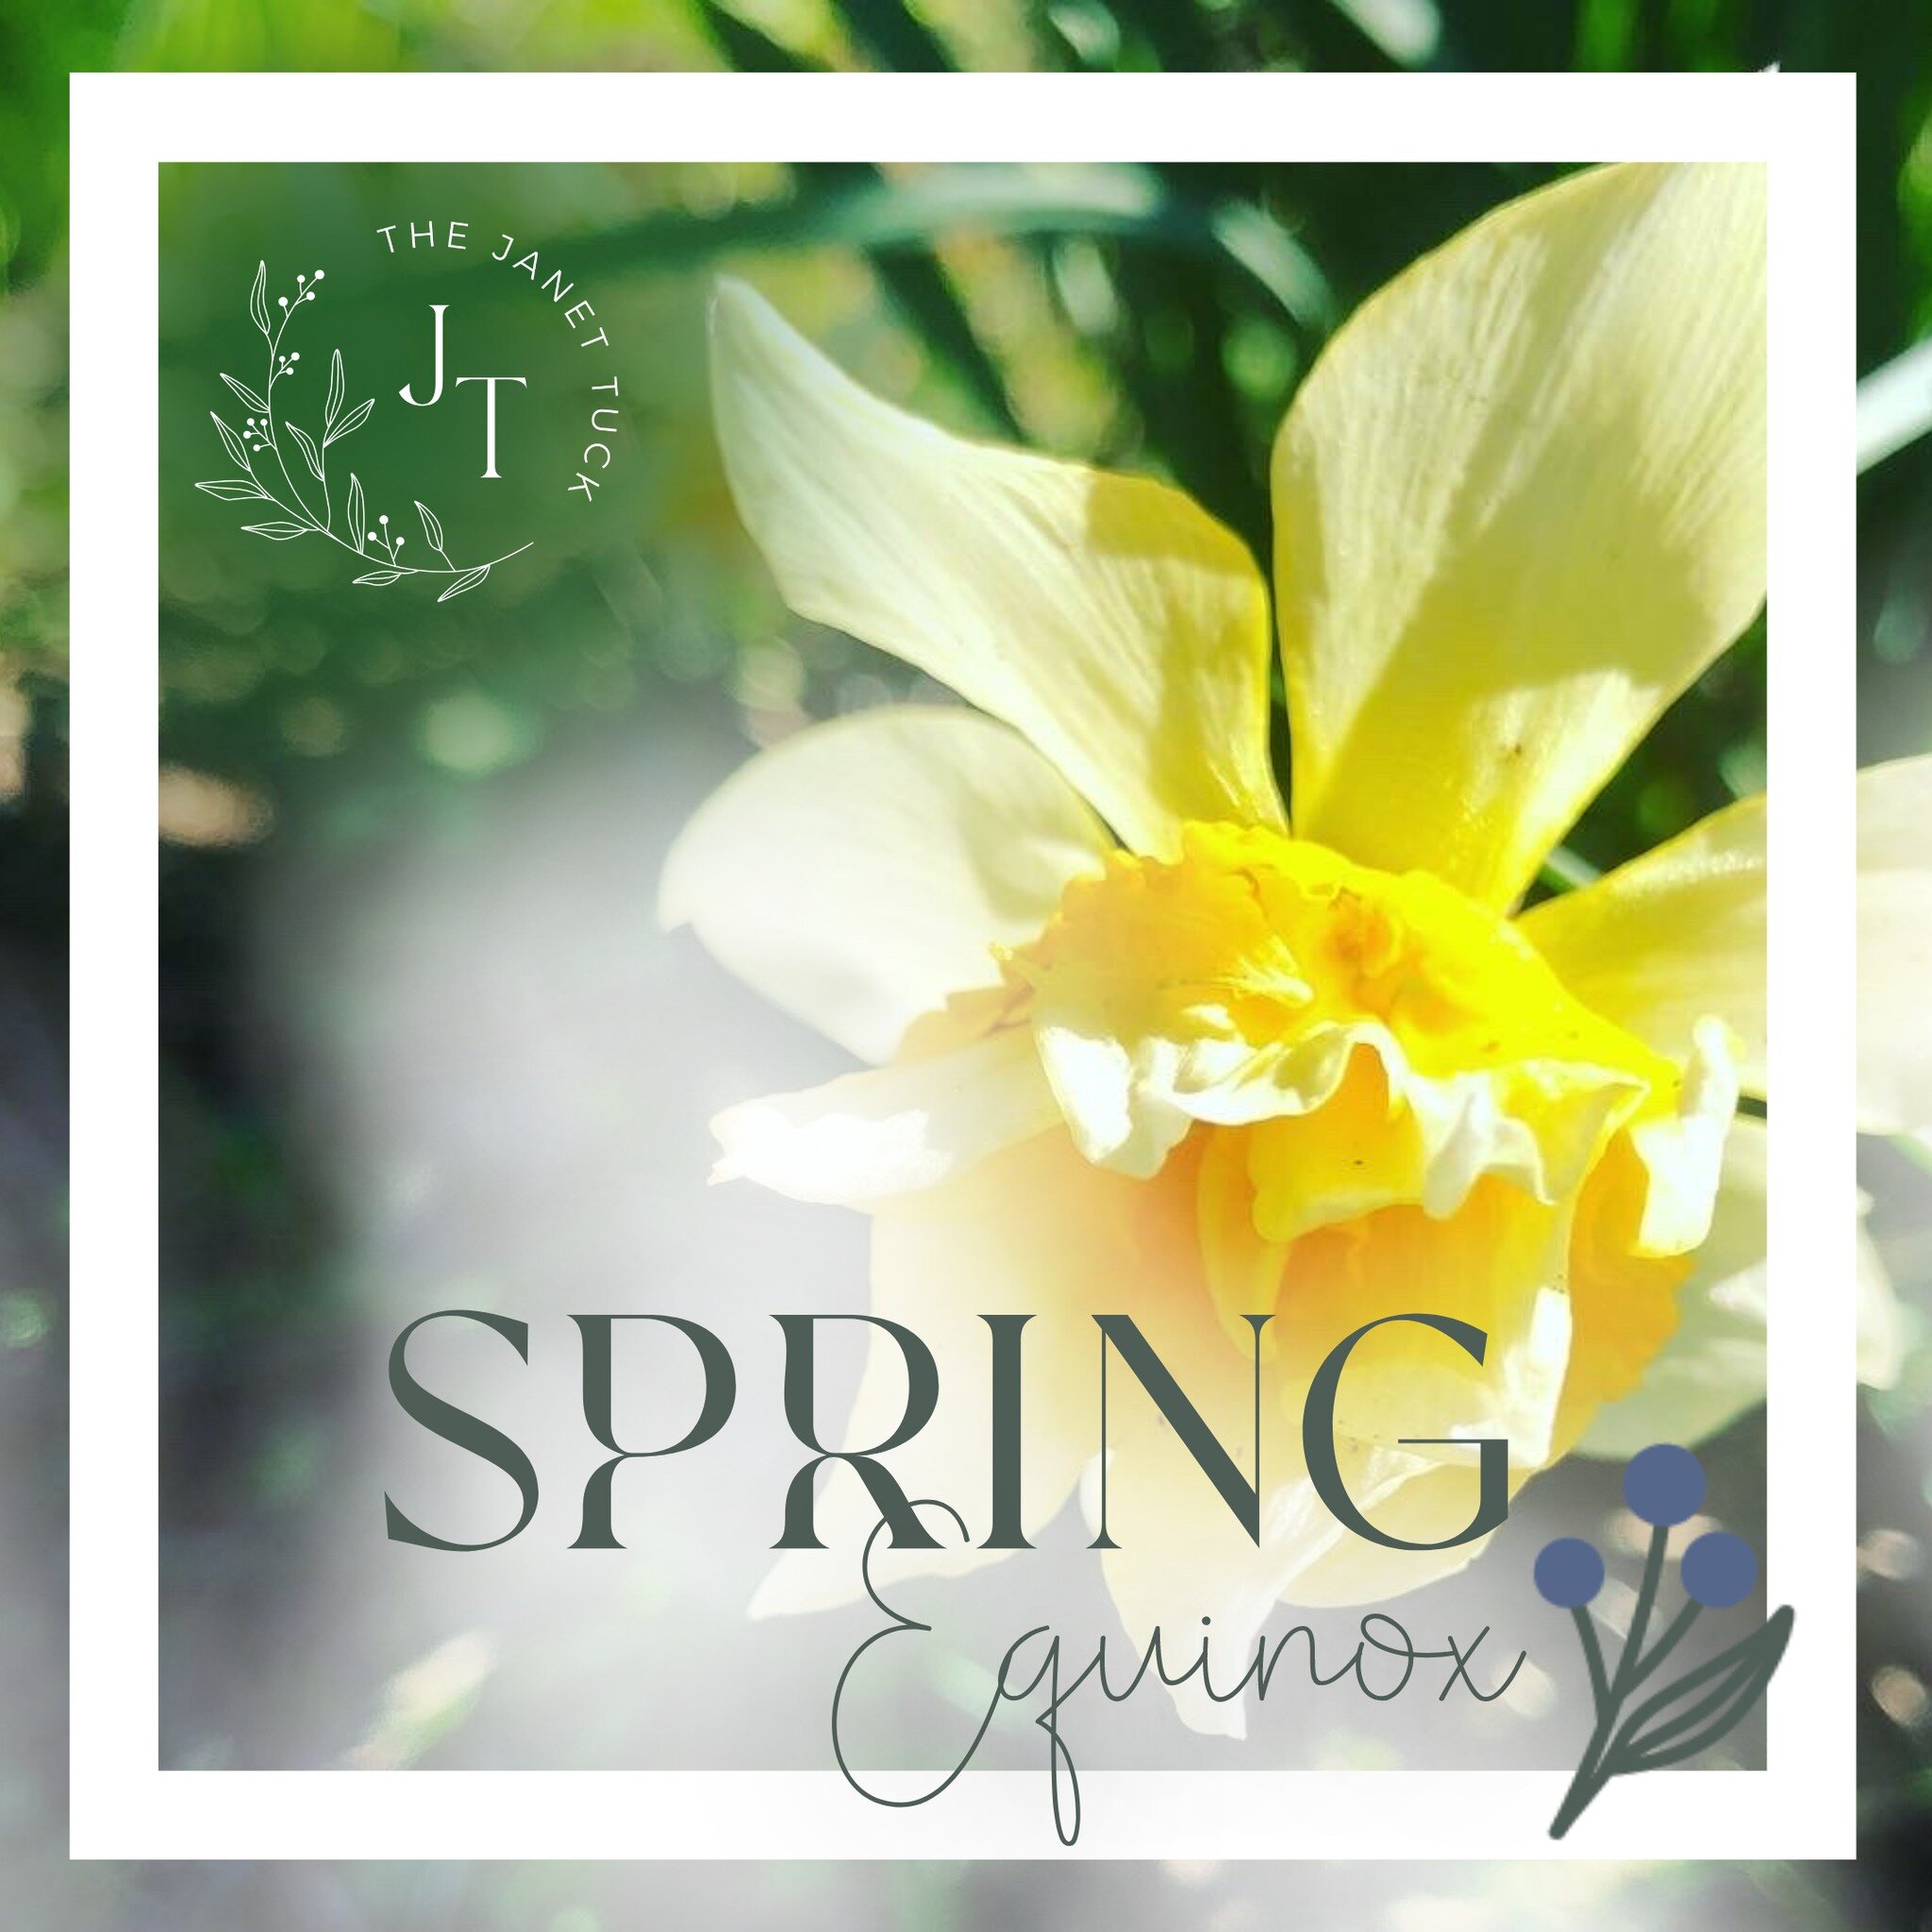 Today, March 20, is the spring equinox. It's the quarter turn of the year, marking the movement from dormancy into the time of growth and renewal. It's an event of balance when the light and the dark are of equal length. 

This time of balance calls 